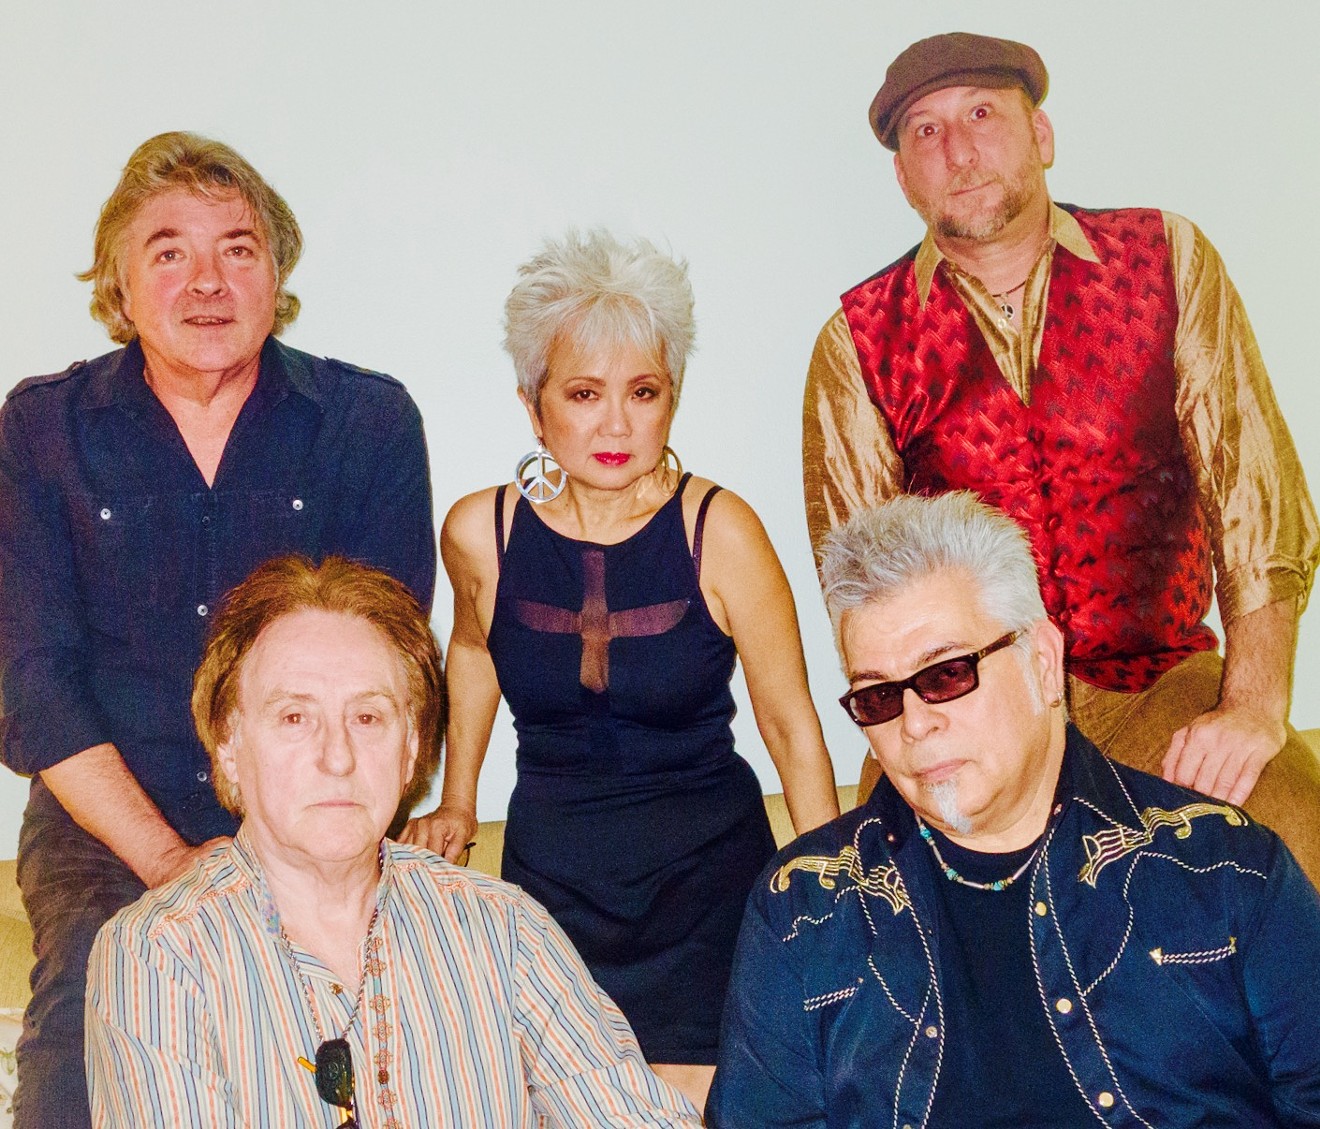 Denny Laine (bottom left)  and the Cryers with Steve Holley (top left) will play Culture Room Saturday night.